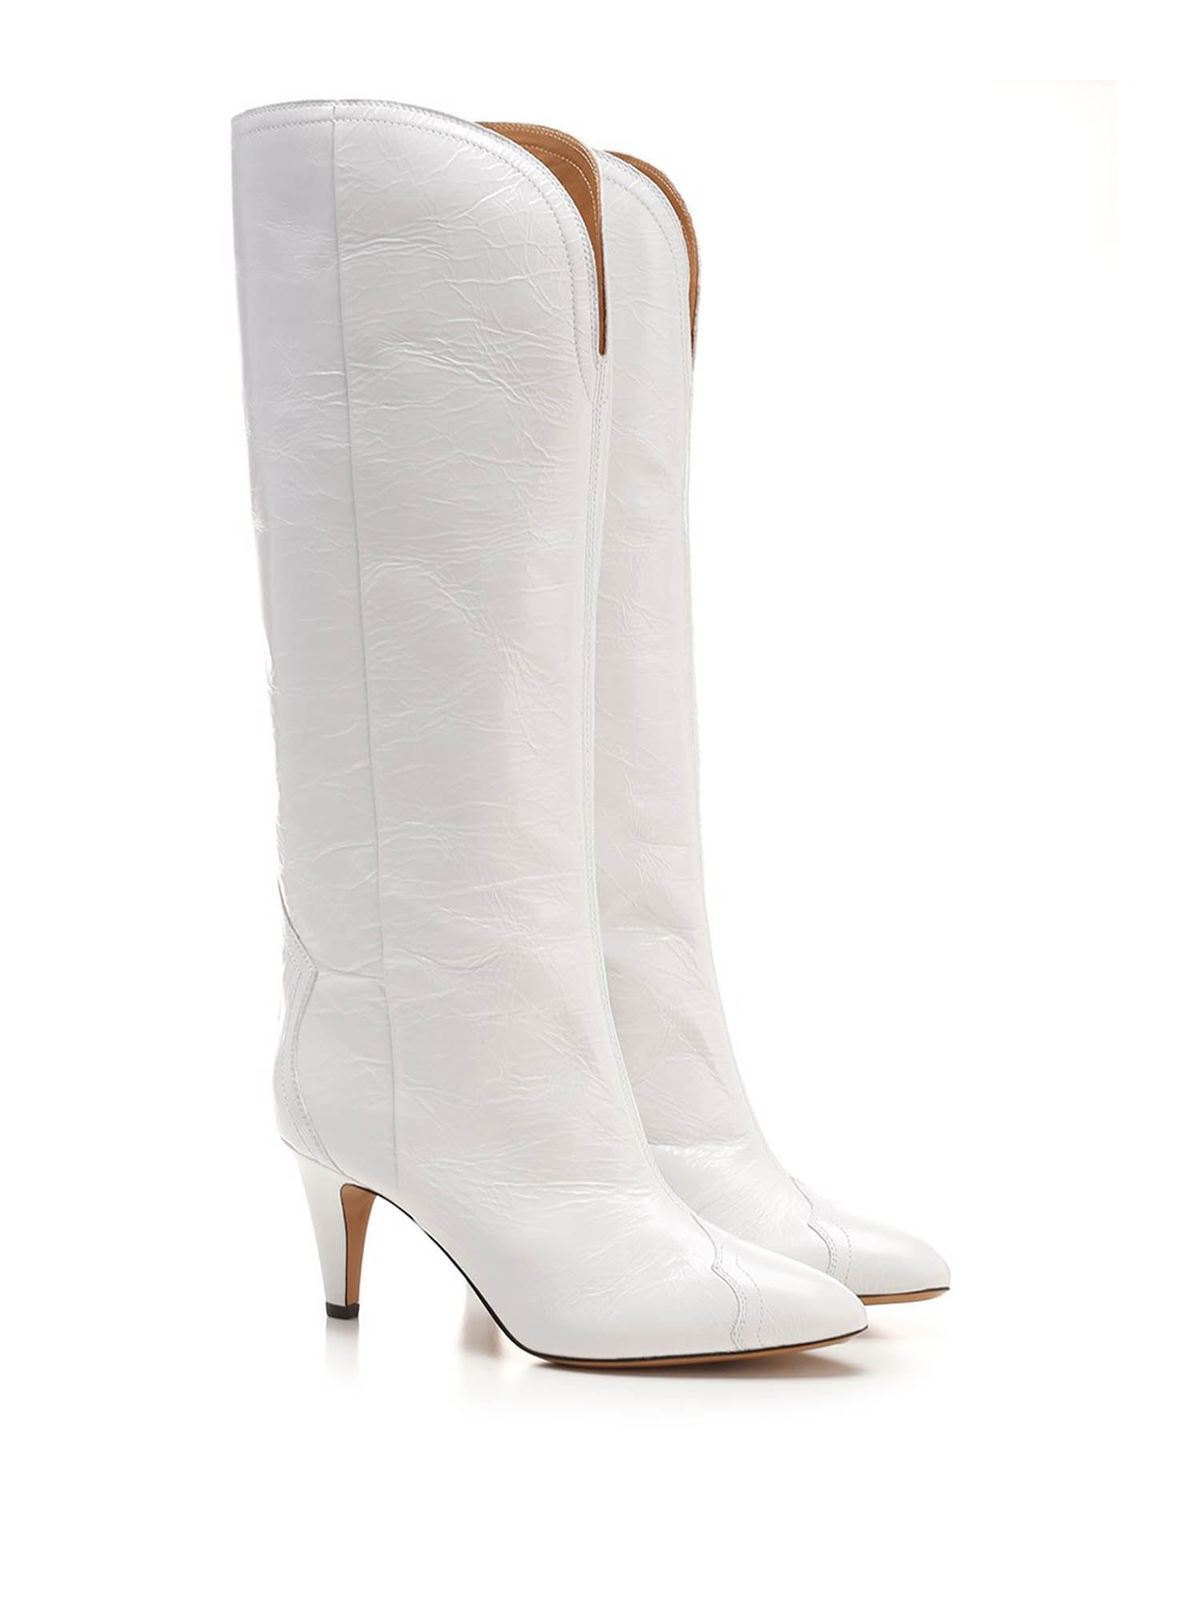 Amerikaans voetbal Twee graden Arashigaoka Boots Isabel Marant - Lestany boots in white - BT020421A001S20WH